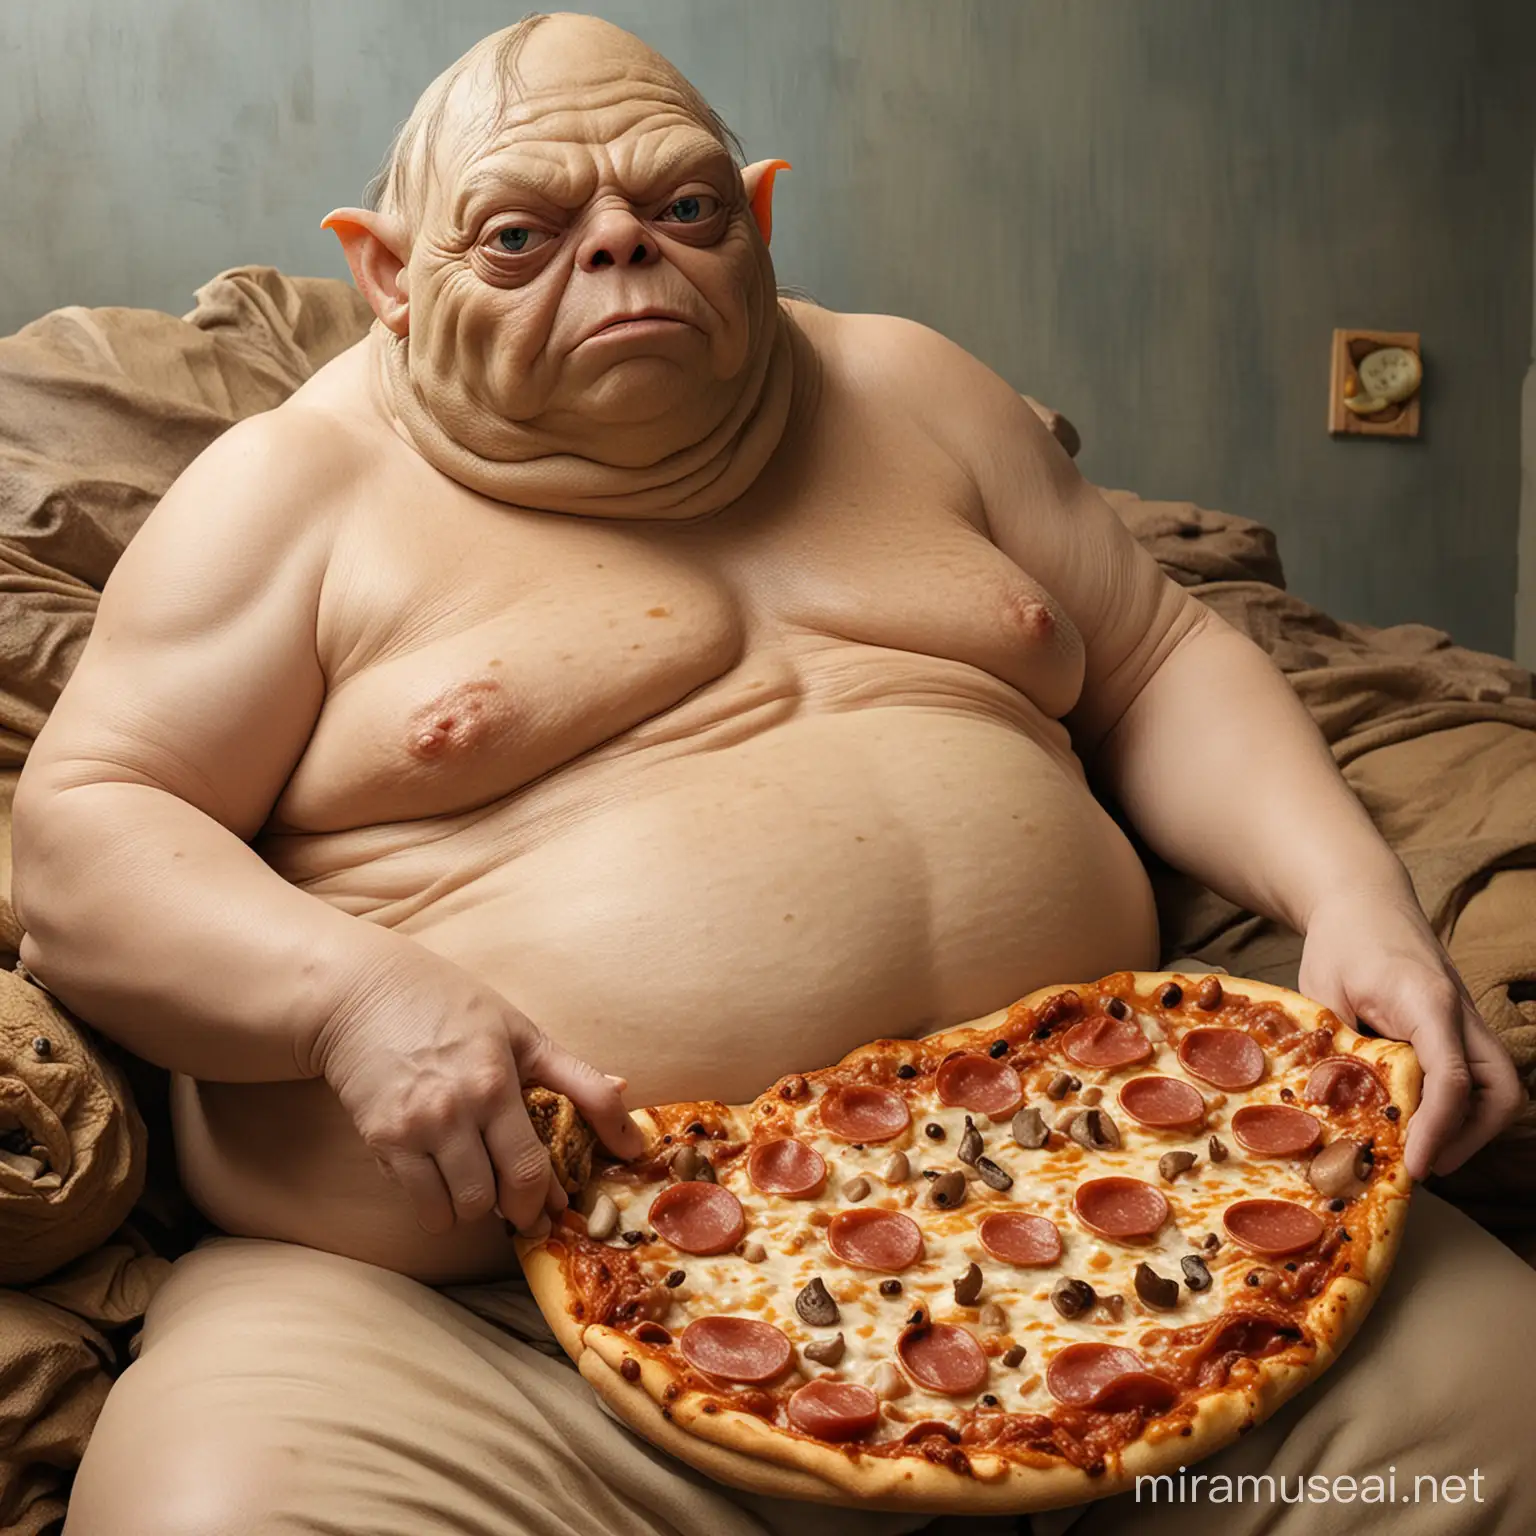 Fantasy Character Gollum Cosplaying as Jabba the Hutt with Pizza on Belly